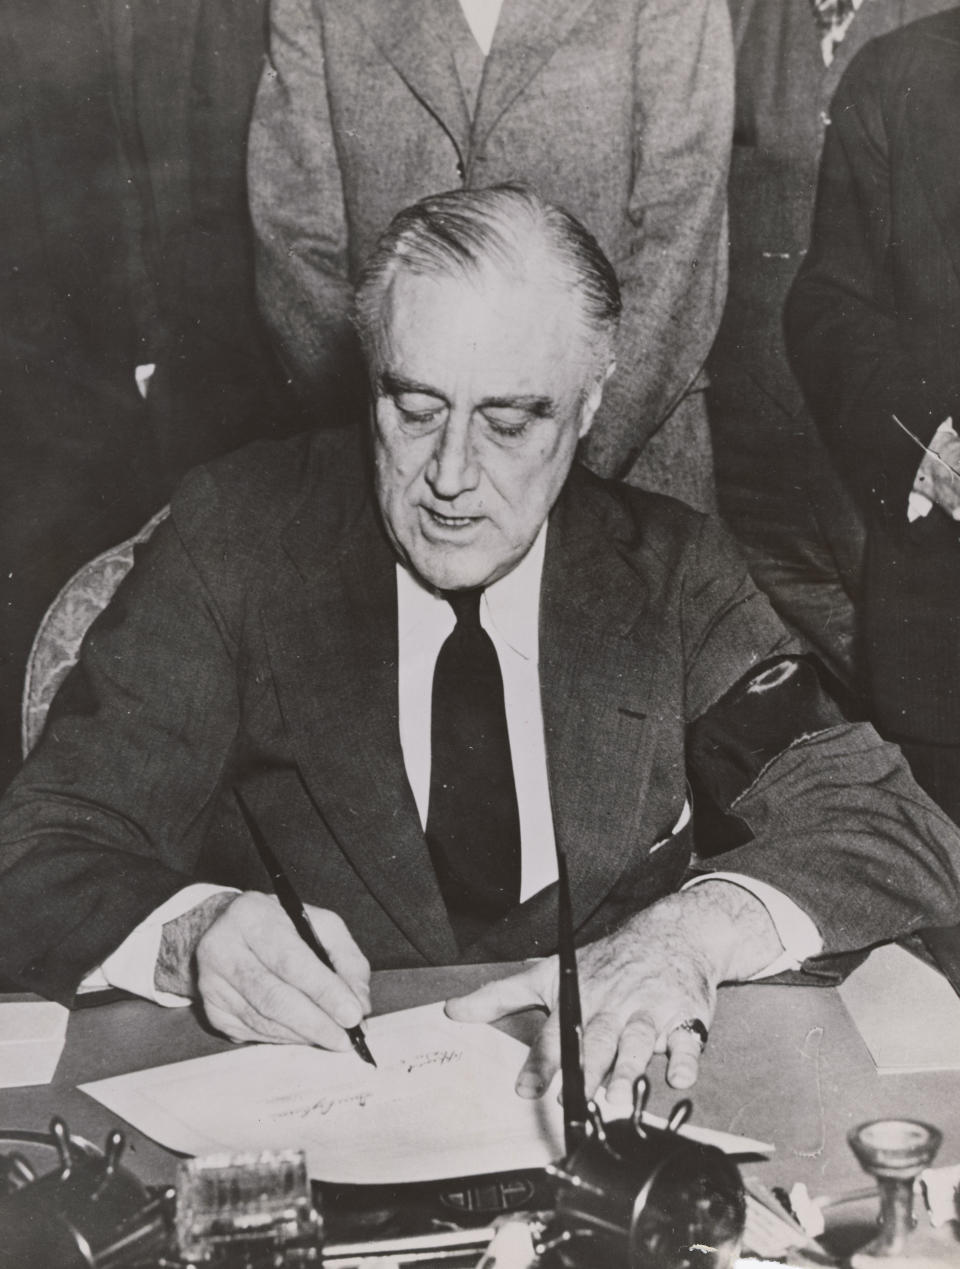 U.S. President Frankin Delano Roosevelt signs the declaration of war on Japan in Washington, DC, U.S. December 8, 1941. The 75th anniversary of the Pearl Harbor attack, which brought the United States into World War Two, is marked on December 7, 2016. U.S. National Archives and Records Administration/Handout via REUTERS   ATTENTION EDITORS - THIS IMAGE WAS PROVIDED BY A THIRD PARTY. EDITORIAL USE ONLY